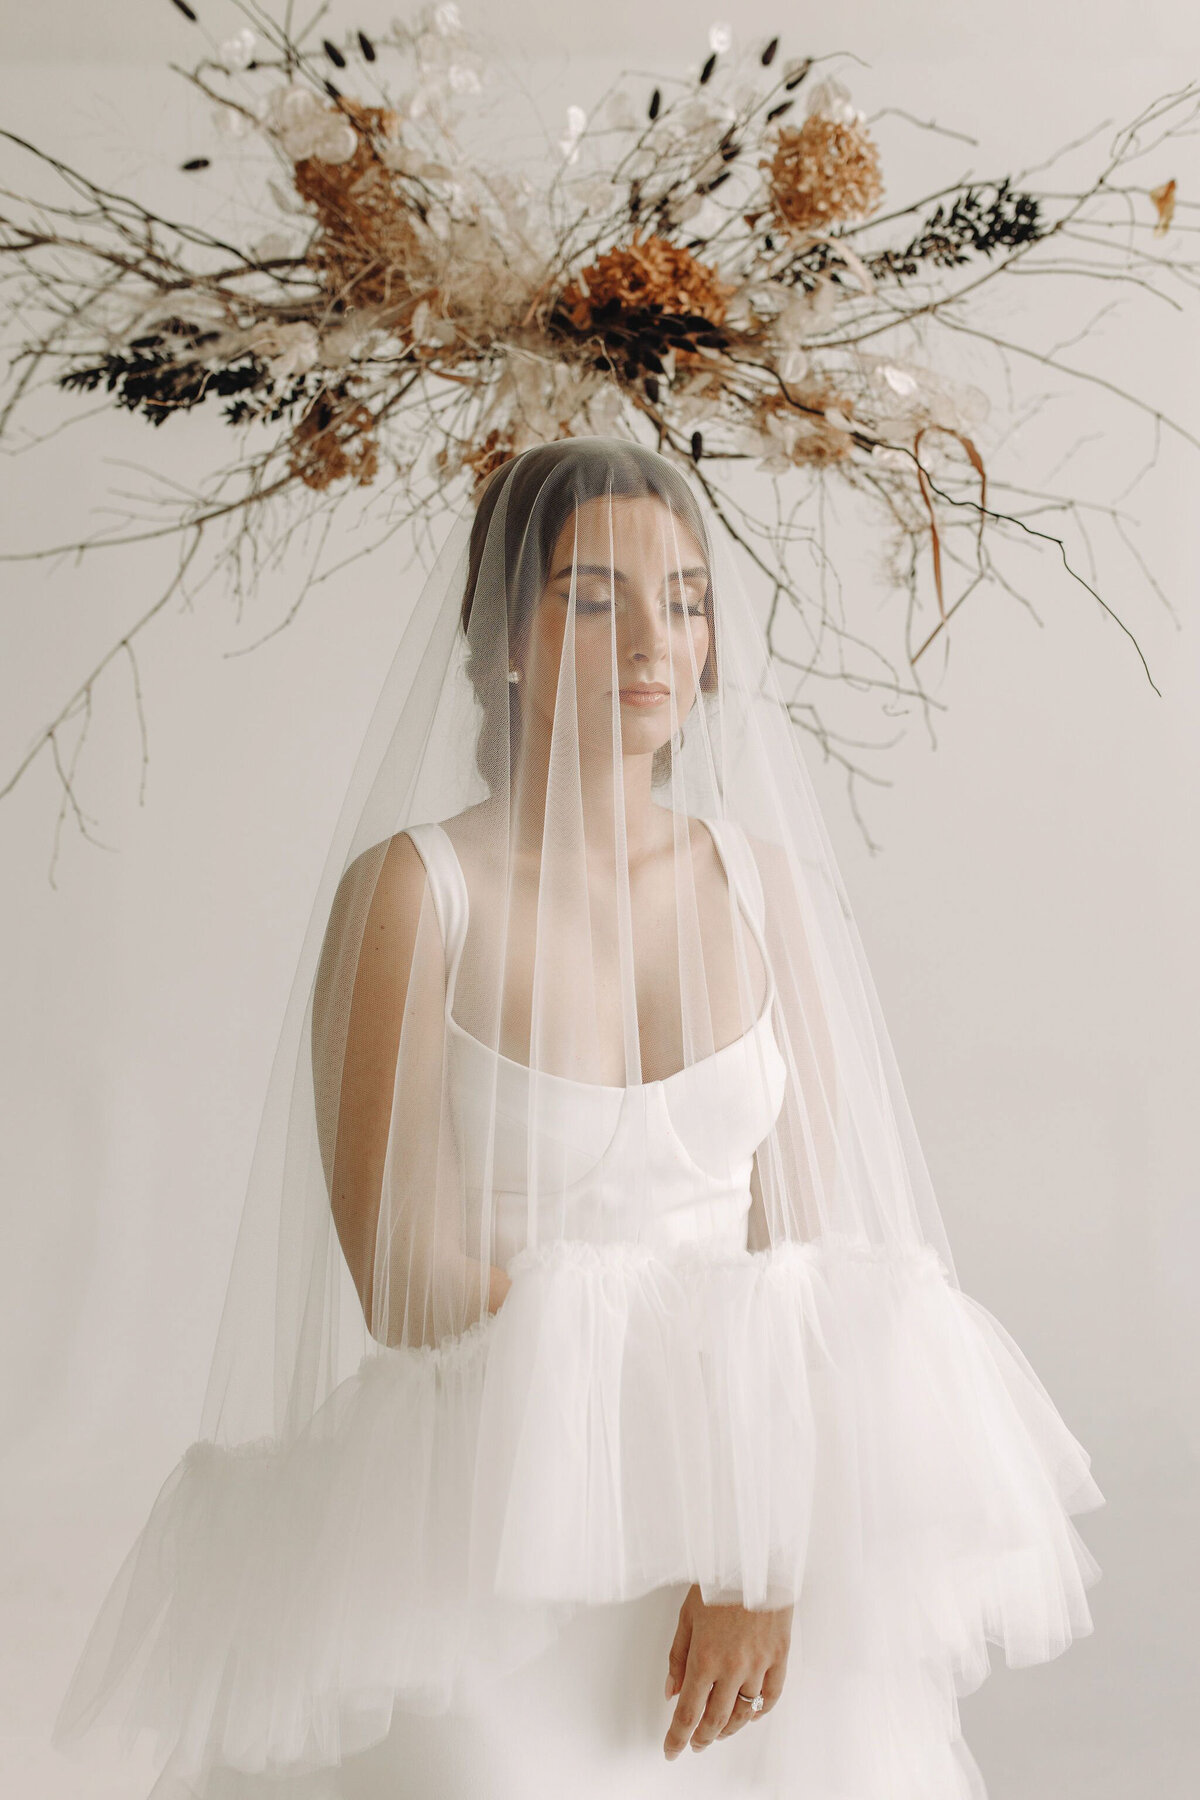 Trendy ruffled bridal veil by Blair Nadeau Bridal Adornments, romantic and modern wedding jewelry based in Brampton.  Featured on the Brontë Bride Vendor Guide.